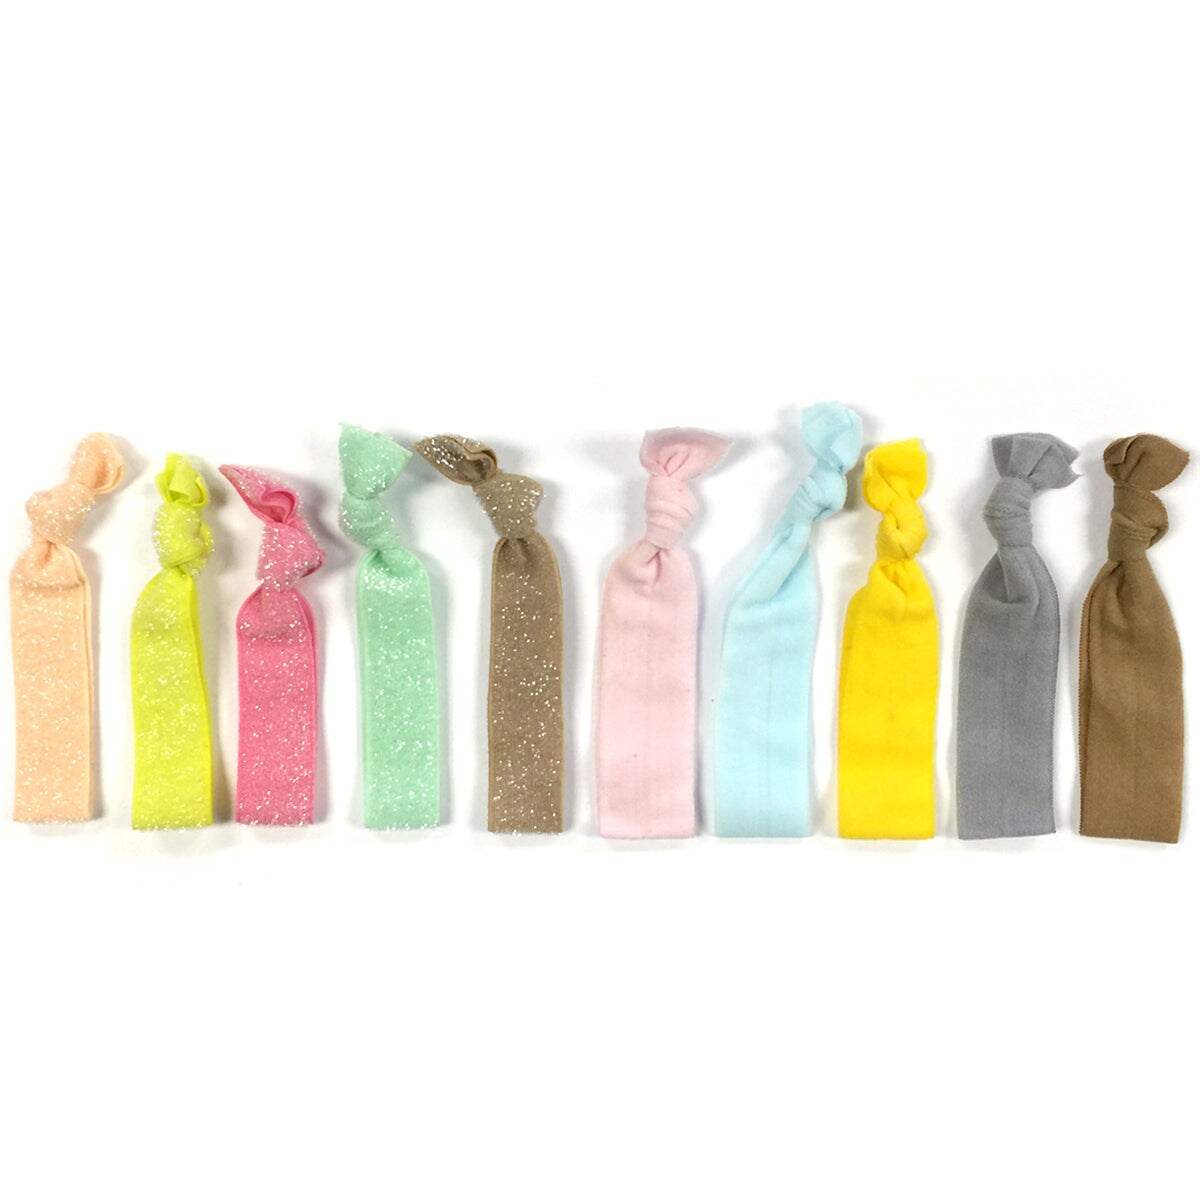 Wrapables 10 Pack Elastic Hair Ties Ponytail Holder, Casual Shimmer